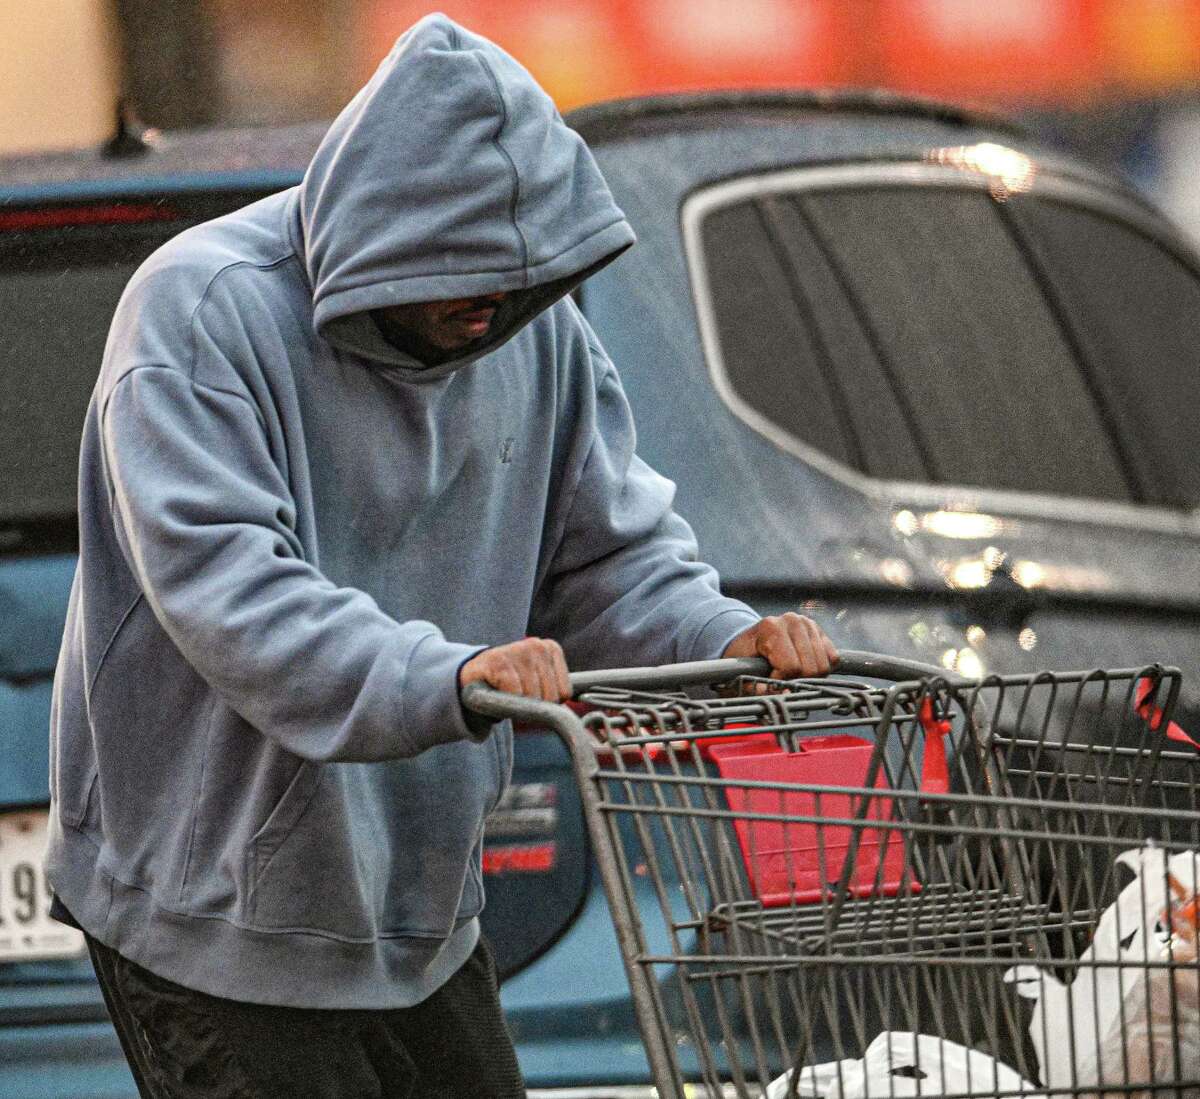 An H-E-B shopper recoils from the cold as he pushes a shopping cart on Tuesday, Jan. 31, 2023. The temperature was hovering near freezing.